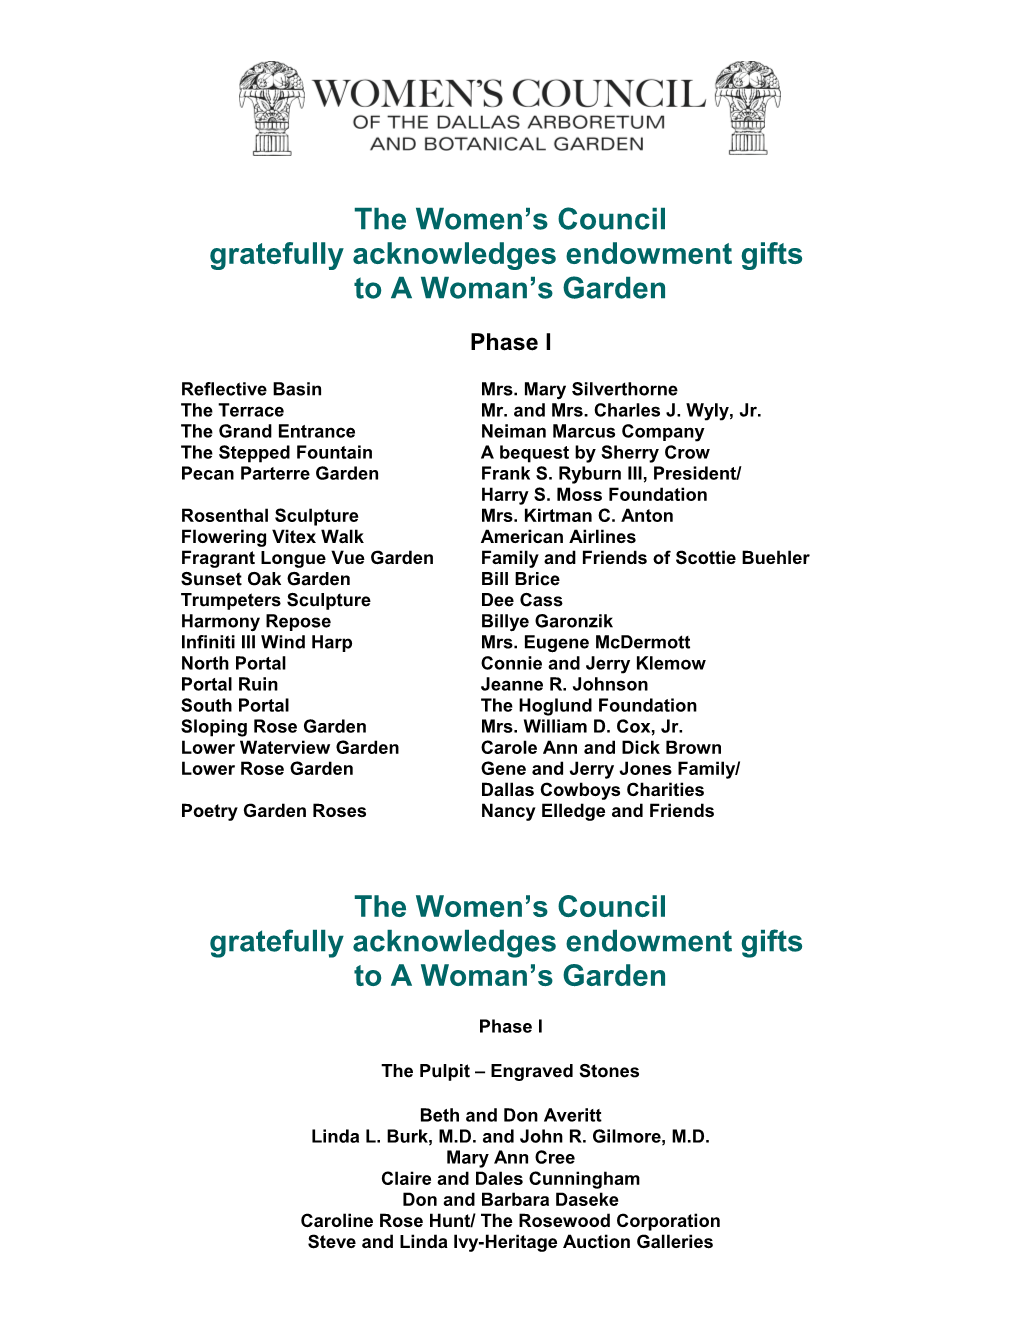 The Women S Council Gratefully Acknowledges Endowment Gifts to a Woman S Garden